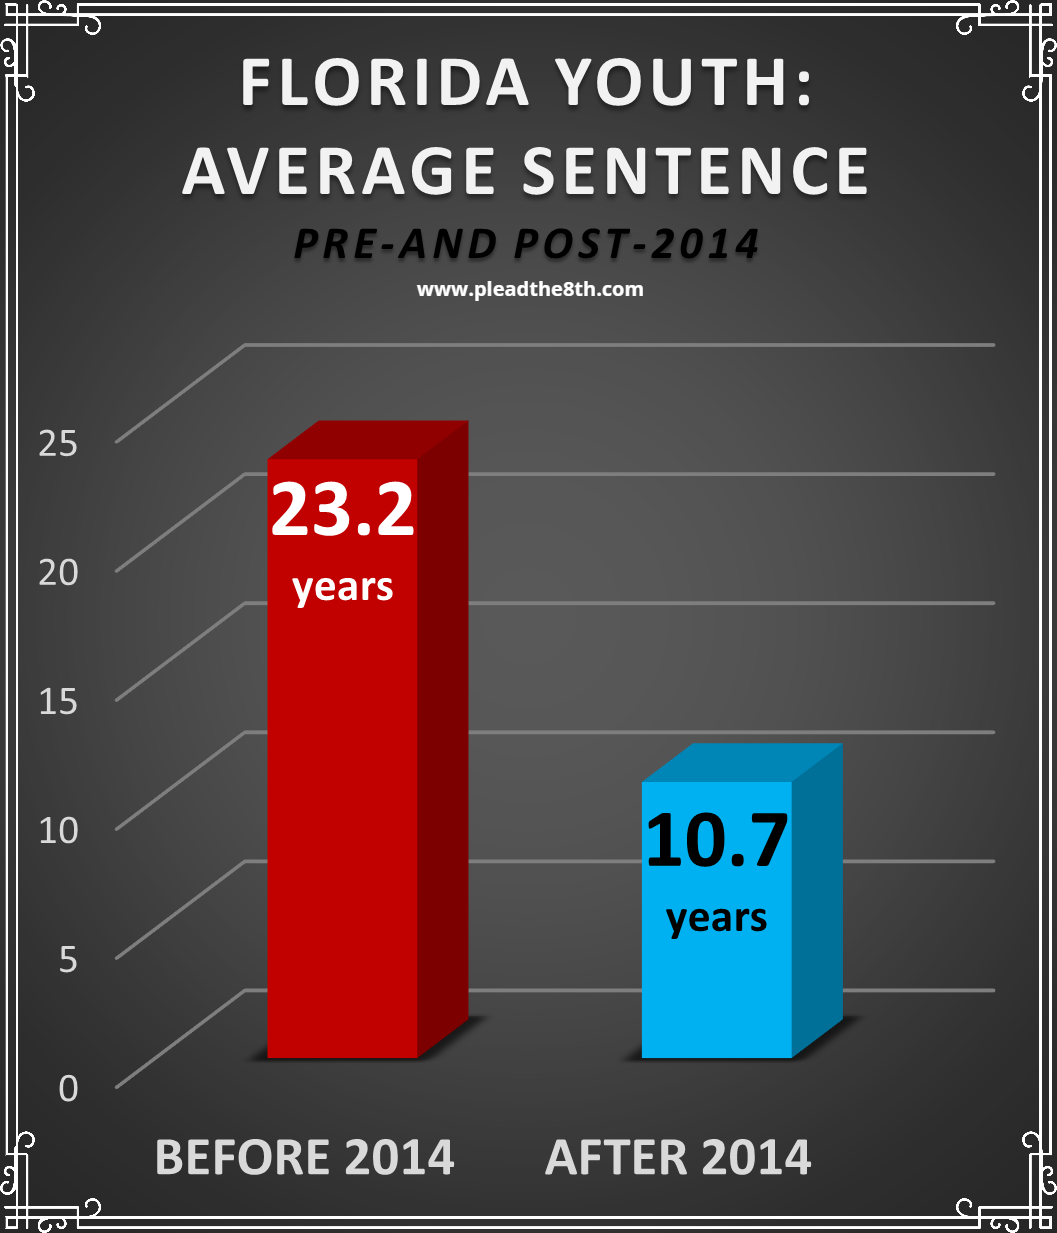 Florida; Average sentence for youth of offences pre 2014 is 23 years, post 2014 is 10.7 years. 